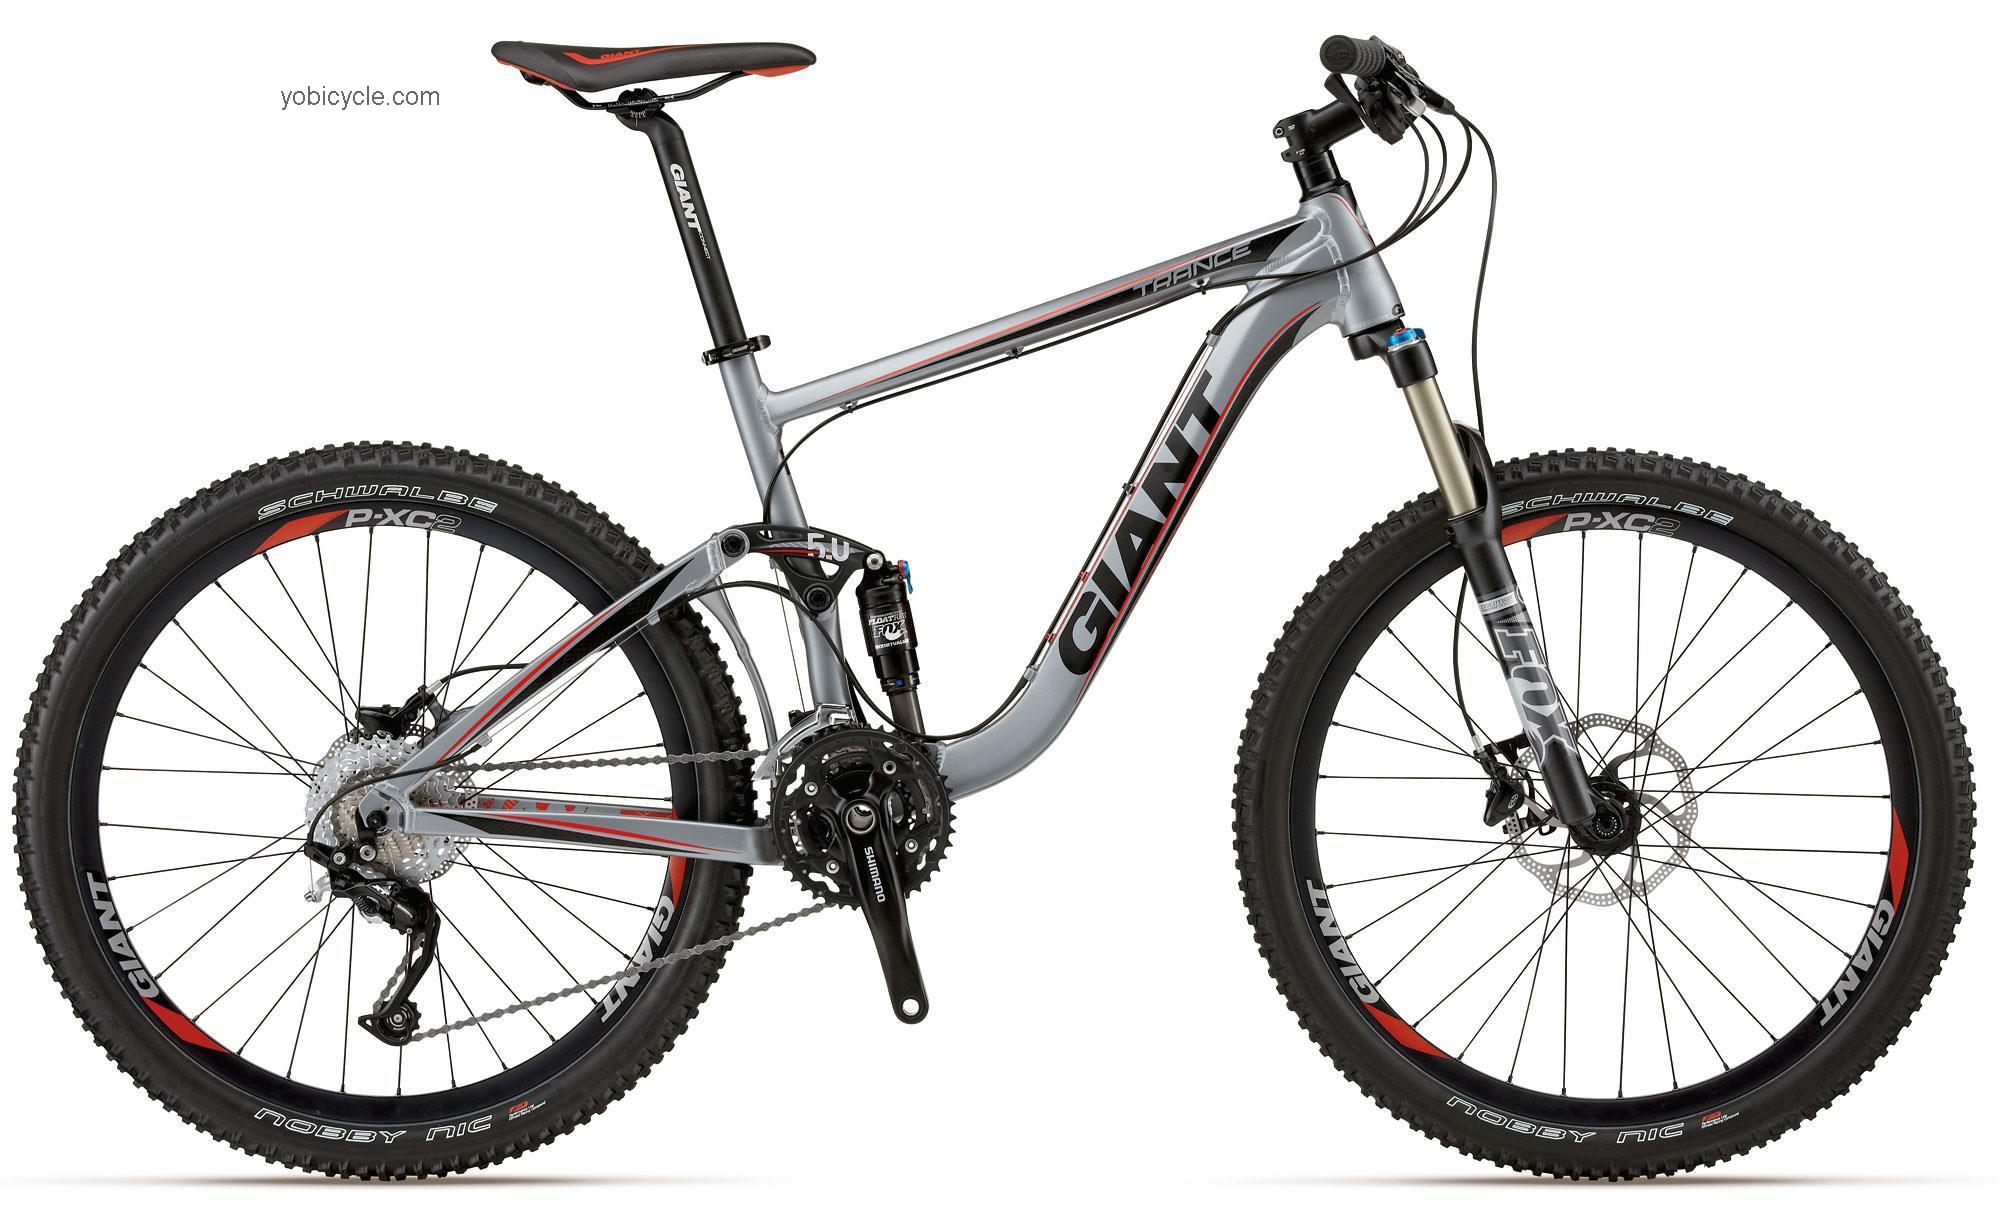 Giant Trance X 2 2012 comparison online with competitors